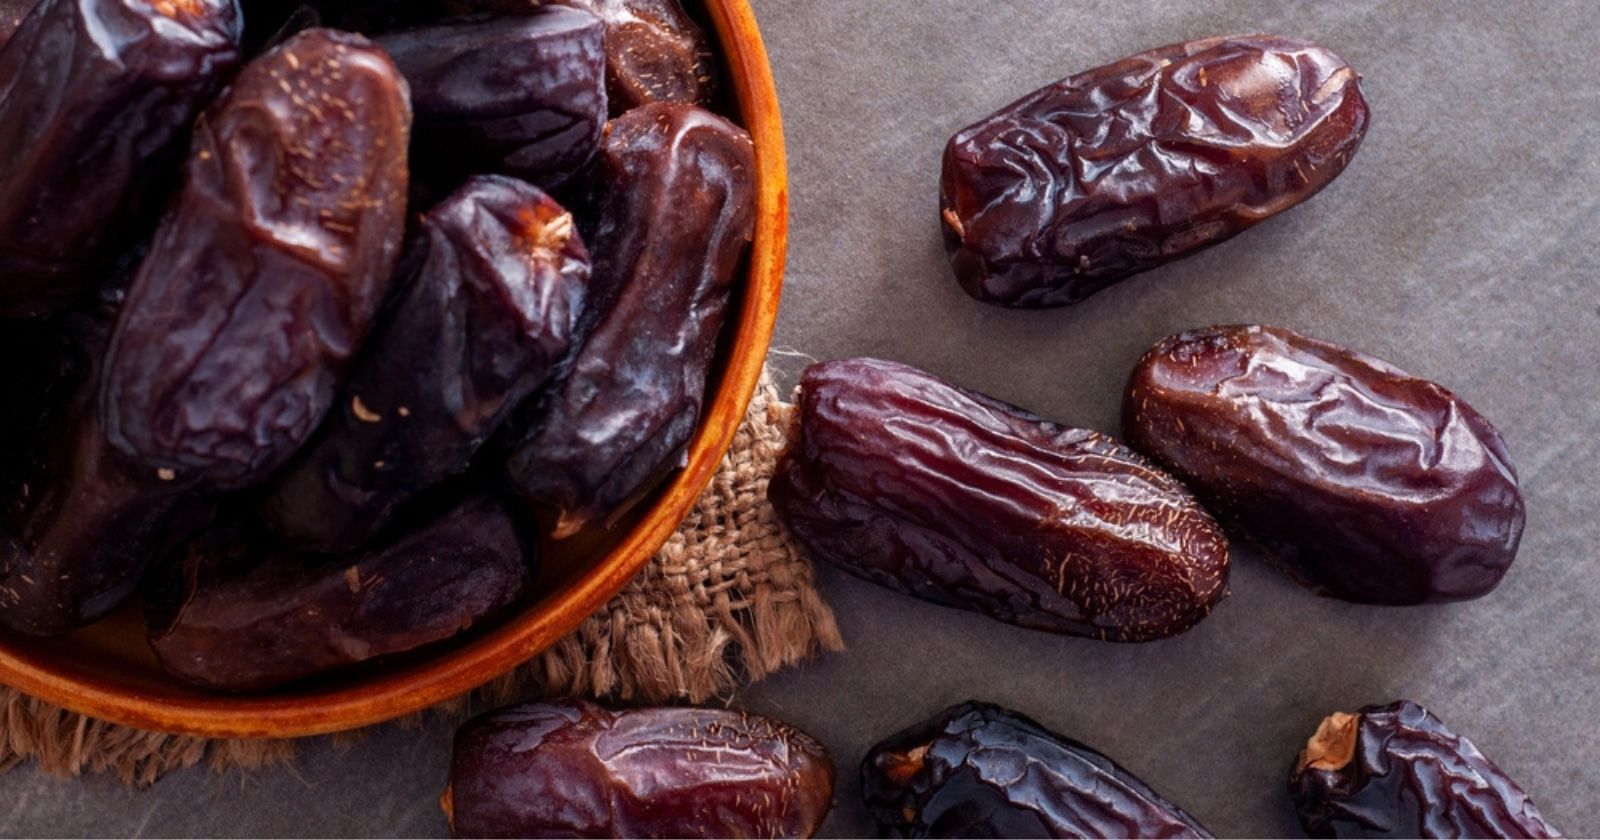 This is how you grow a date palm from a pit in 4 simple steps